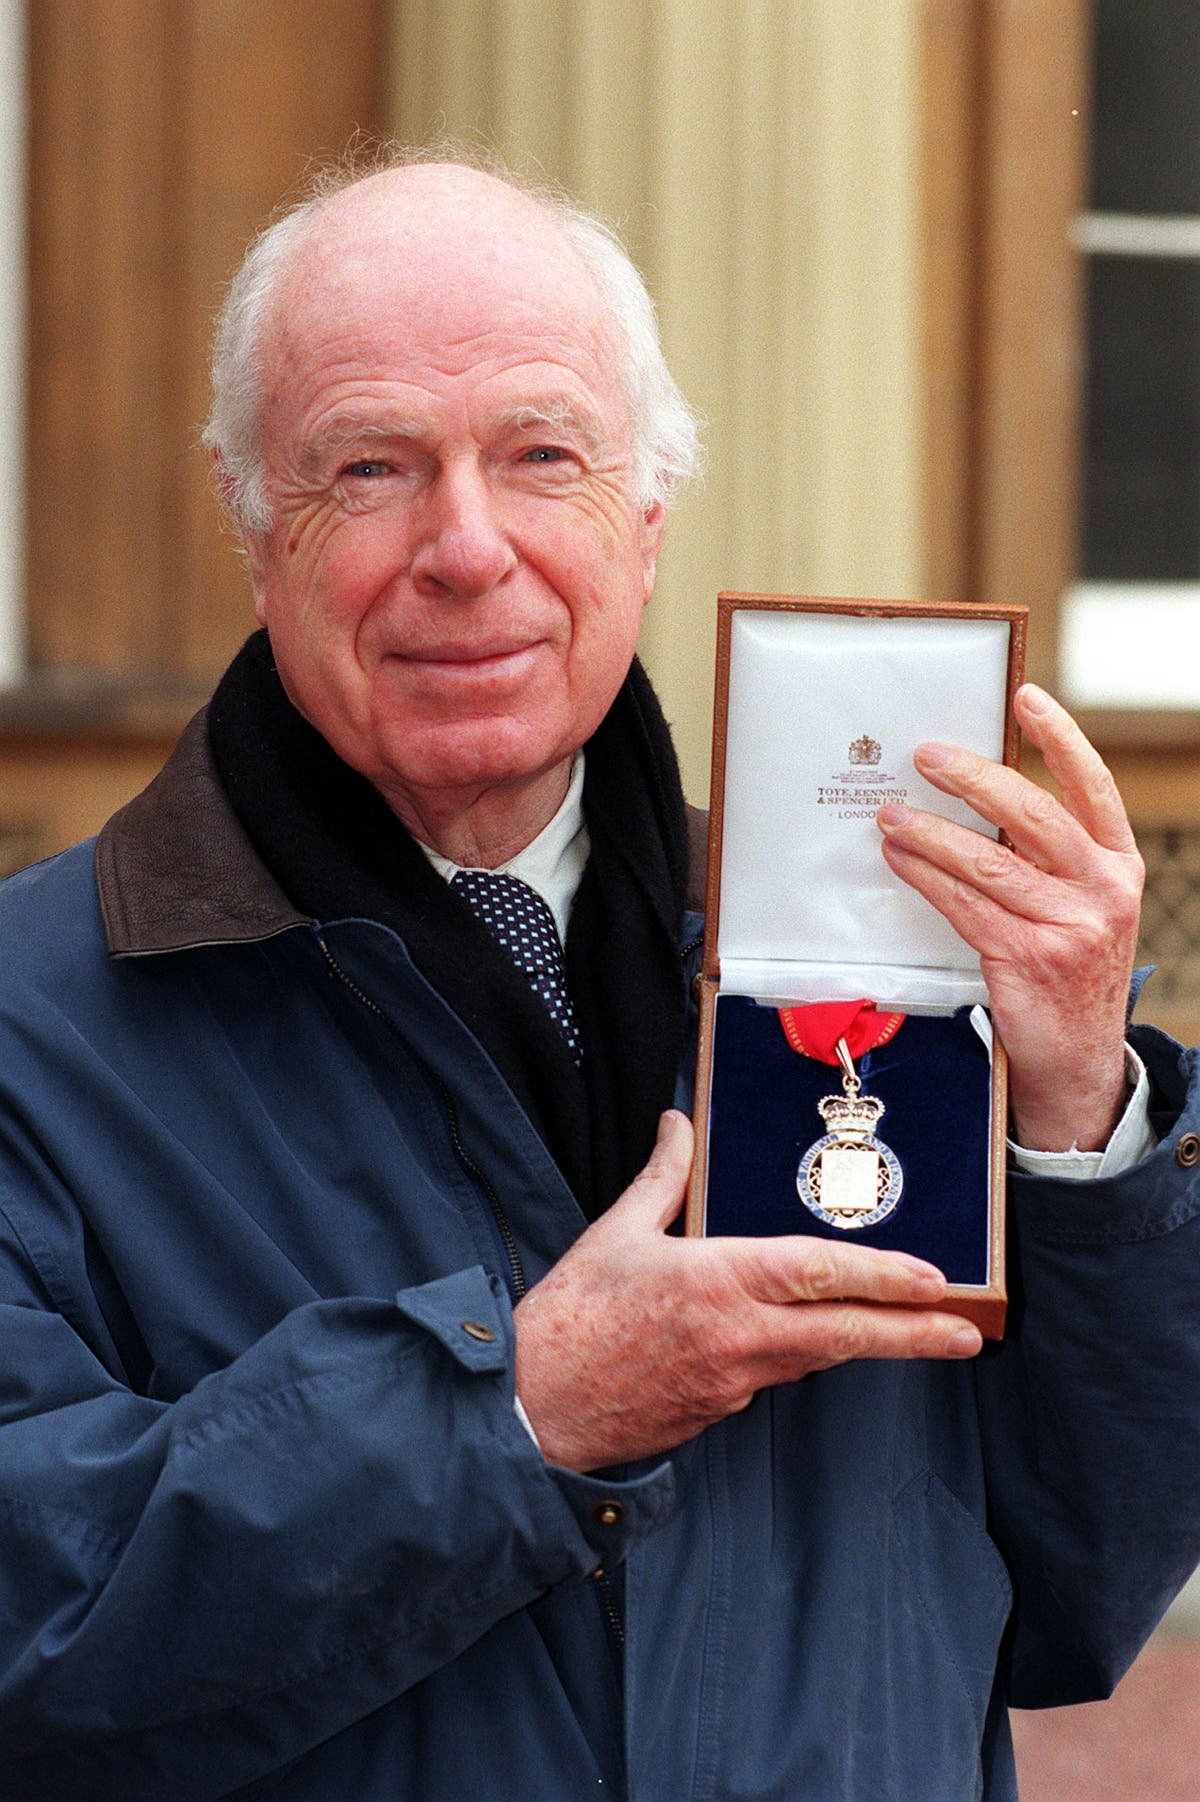 Theatre and film director Peter Brook dies aged 97, says French media